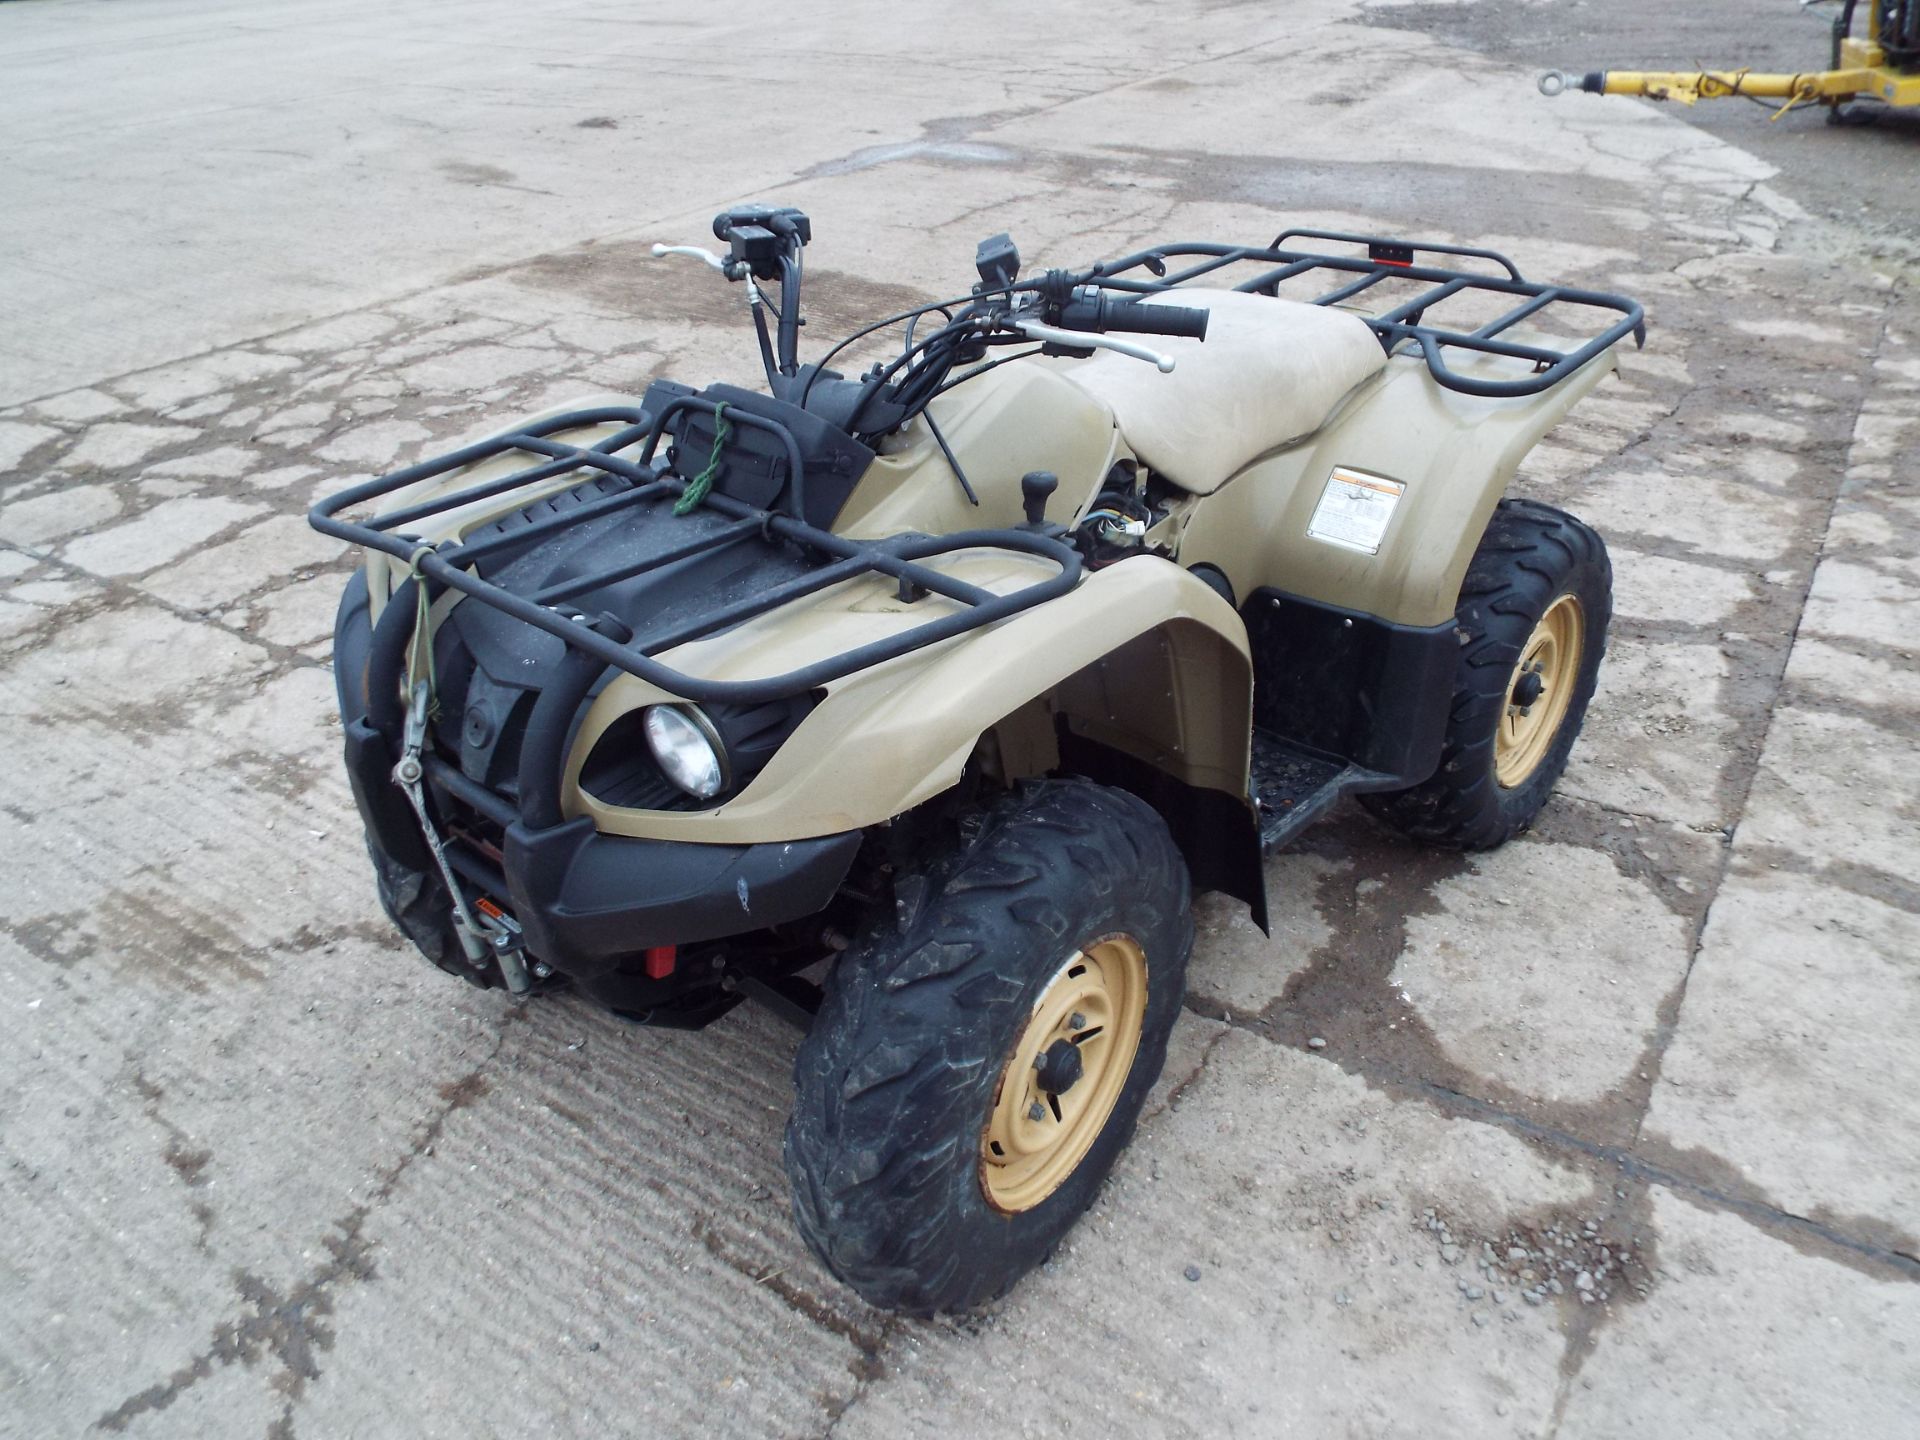 Military Specification Yamaha Grizzly 450 4 x 4 ATV Quad Bike Complete with Winch - Image 3 of 20